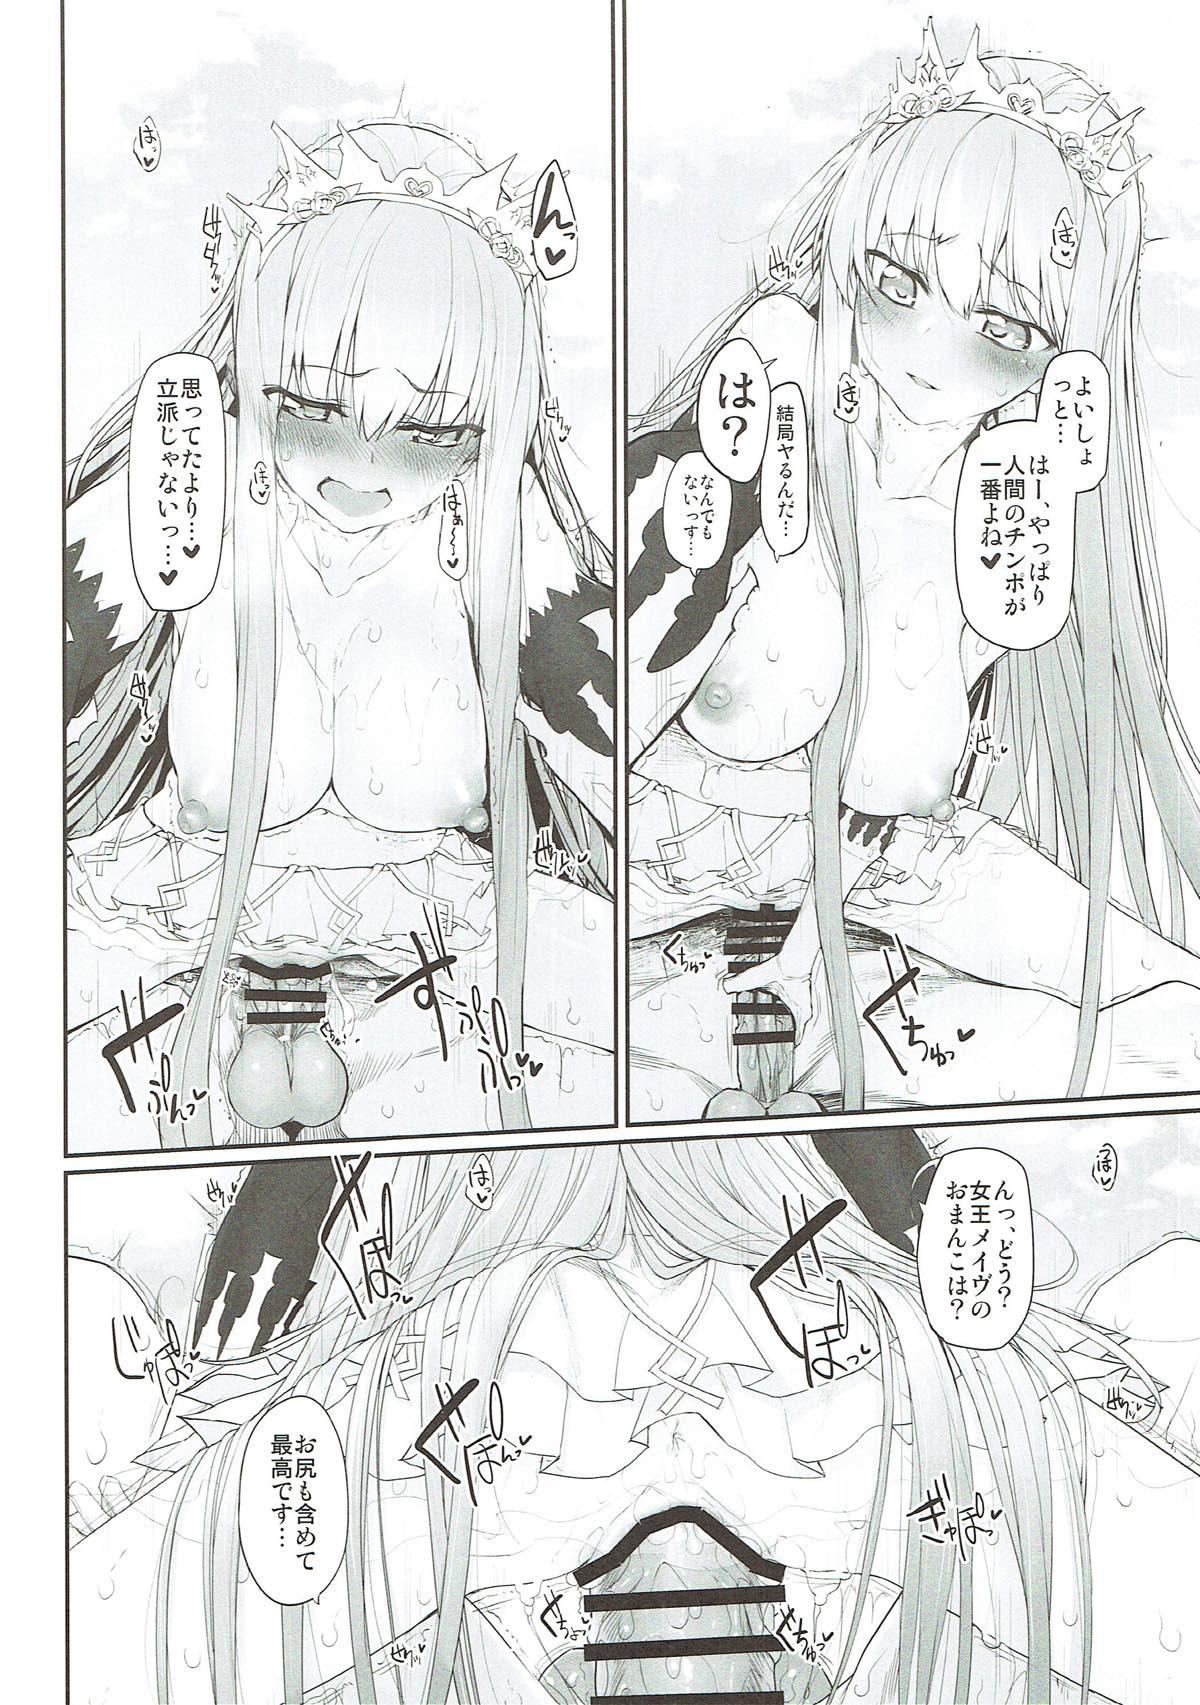 Foursome Marked Girls Vol. 16 - Fate grand order Japan - Page 13